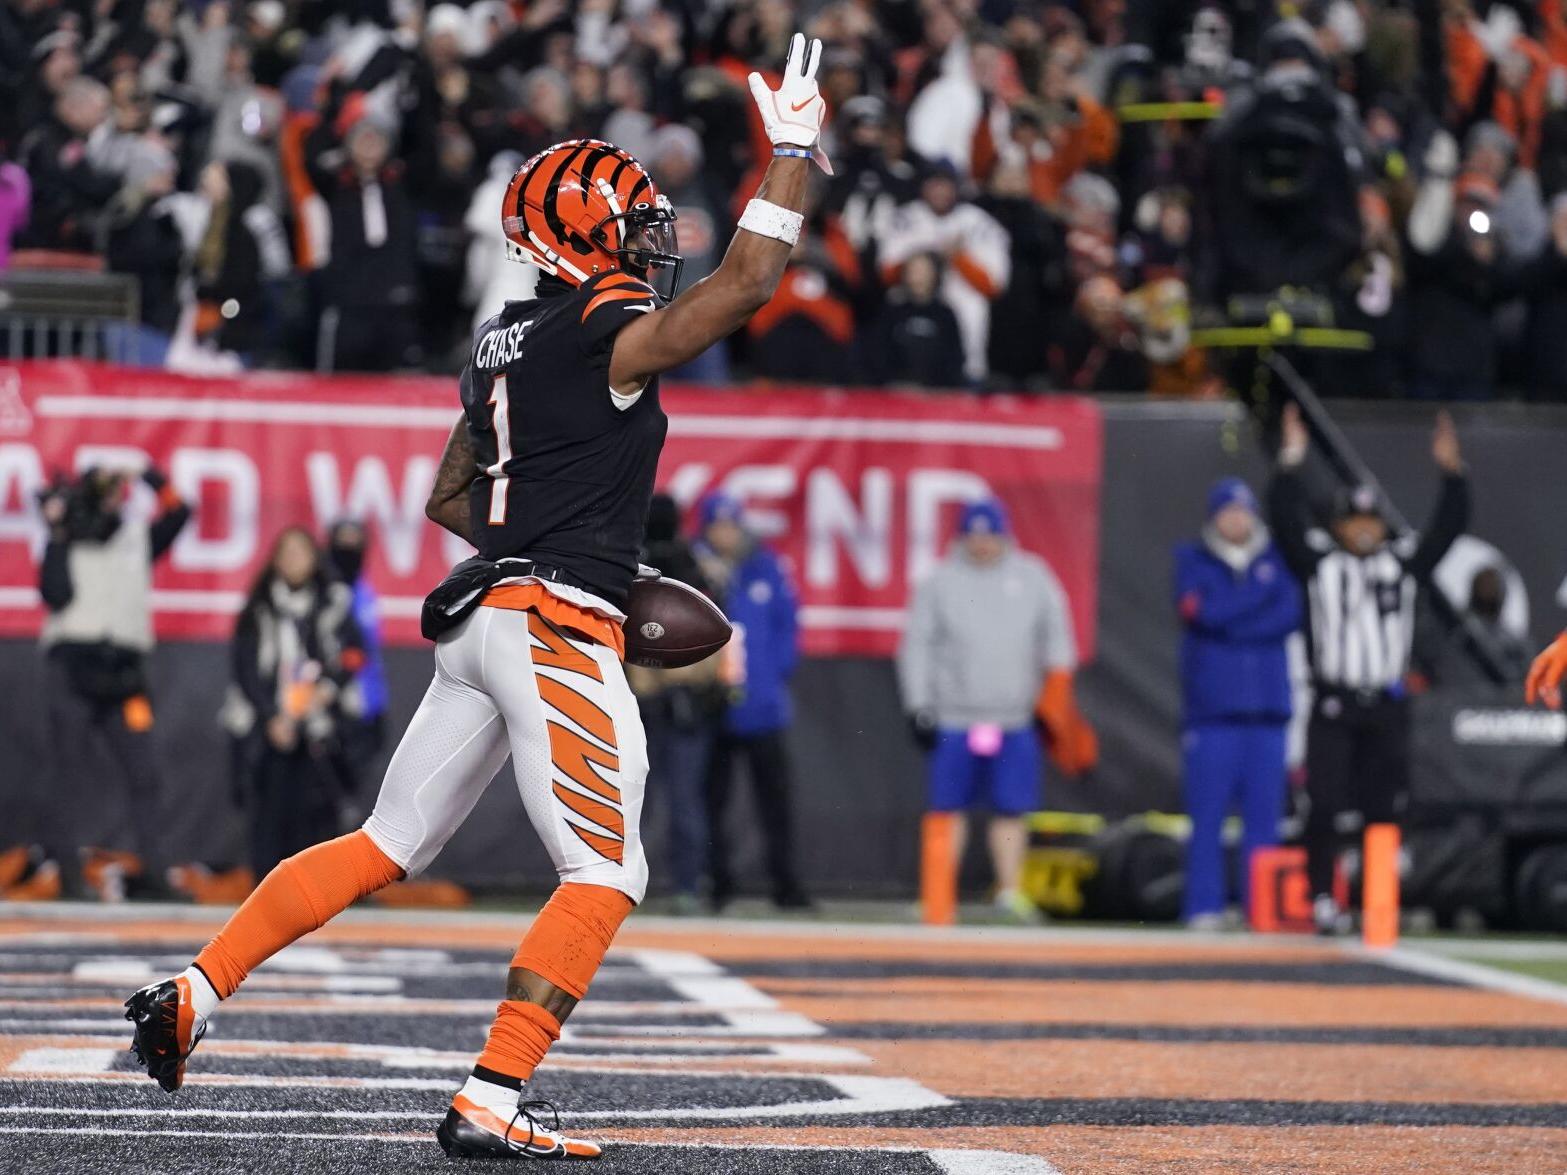 Bengals vs. Bills same-game parlay picks: Bet on Chase to score